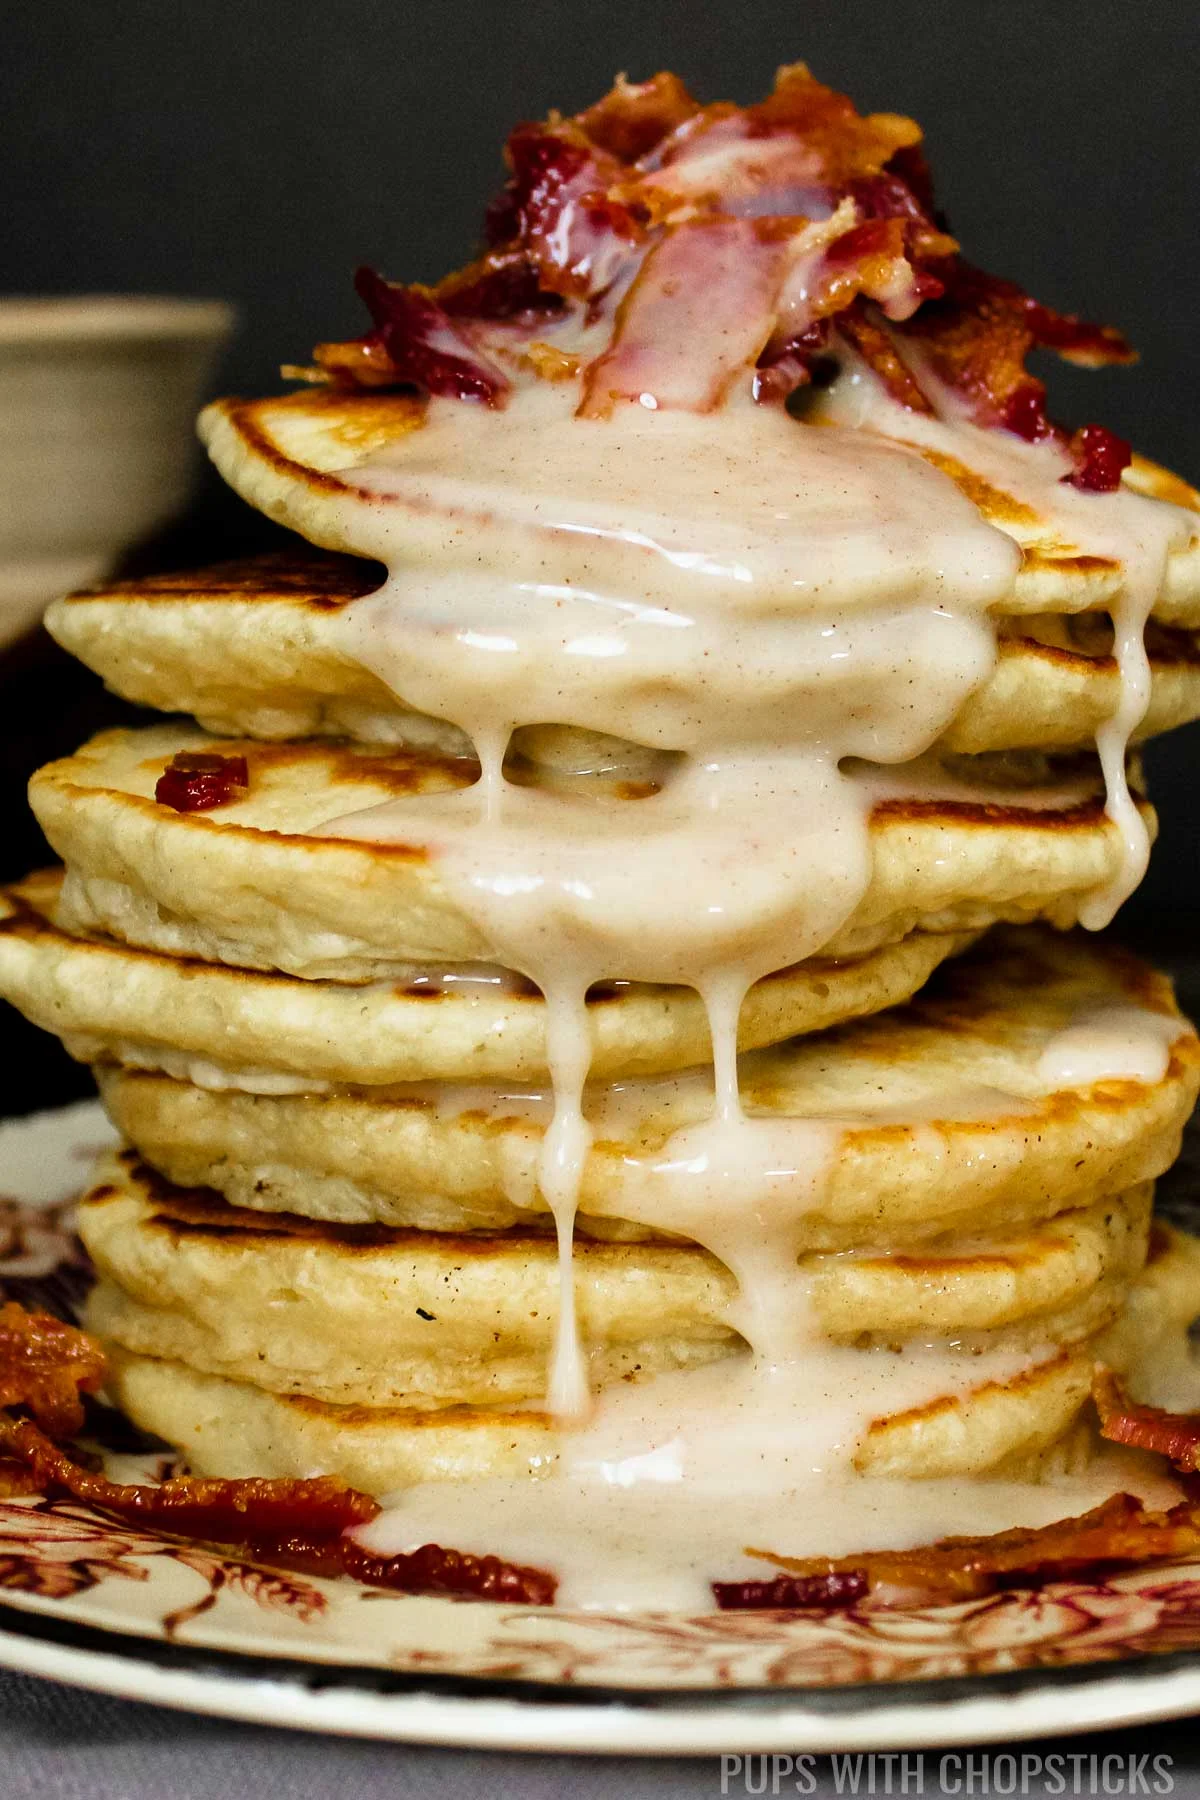 Condensed milk pancakes with candied bacon on top.